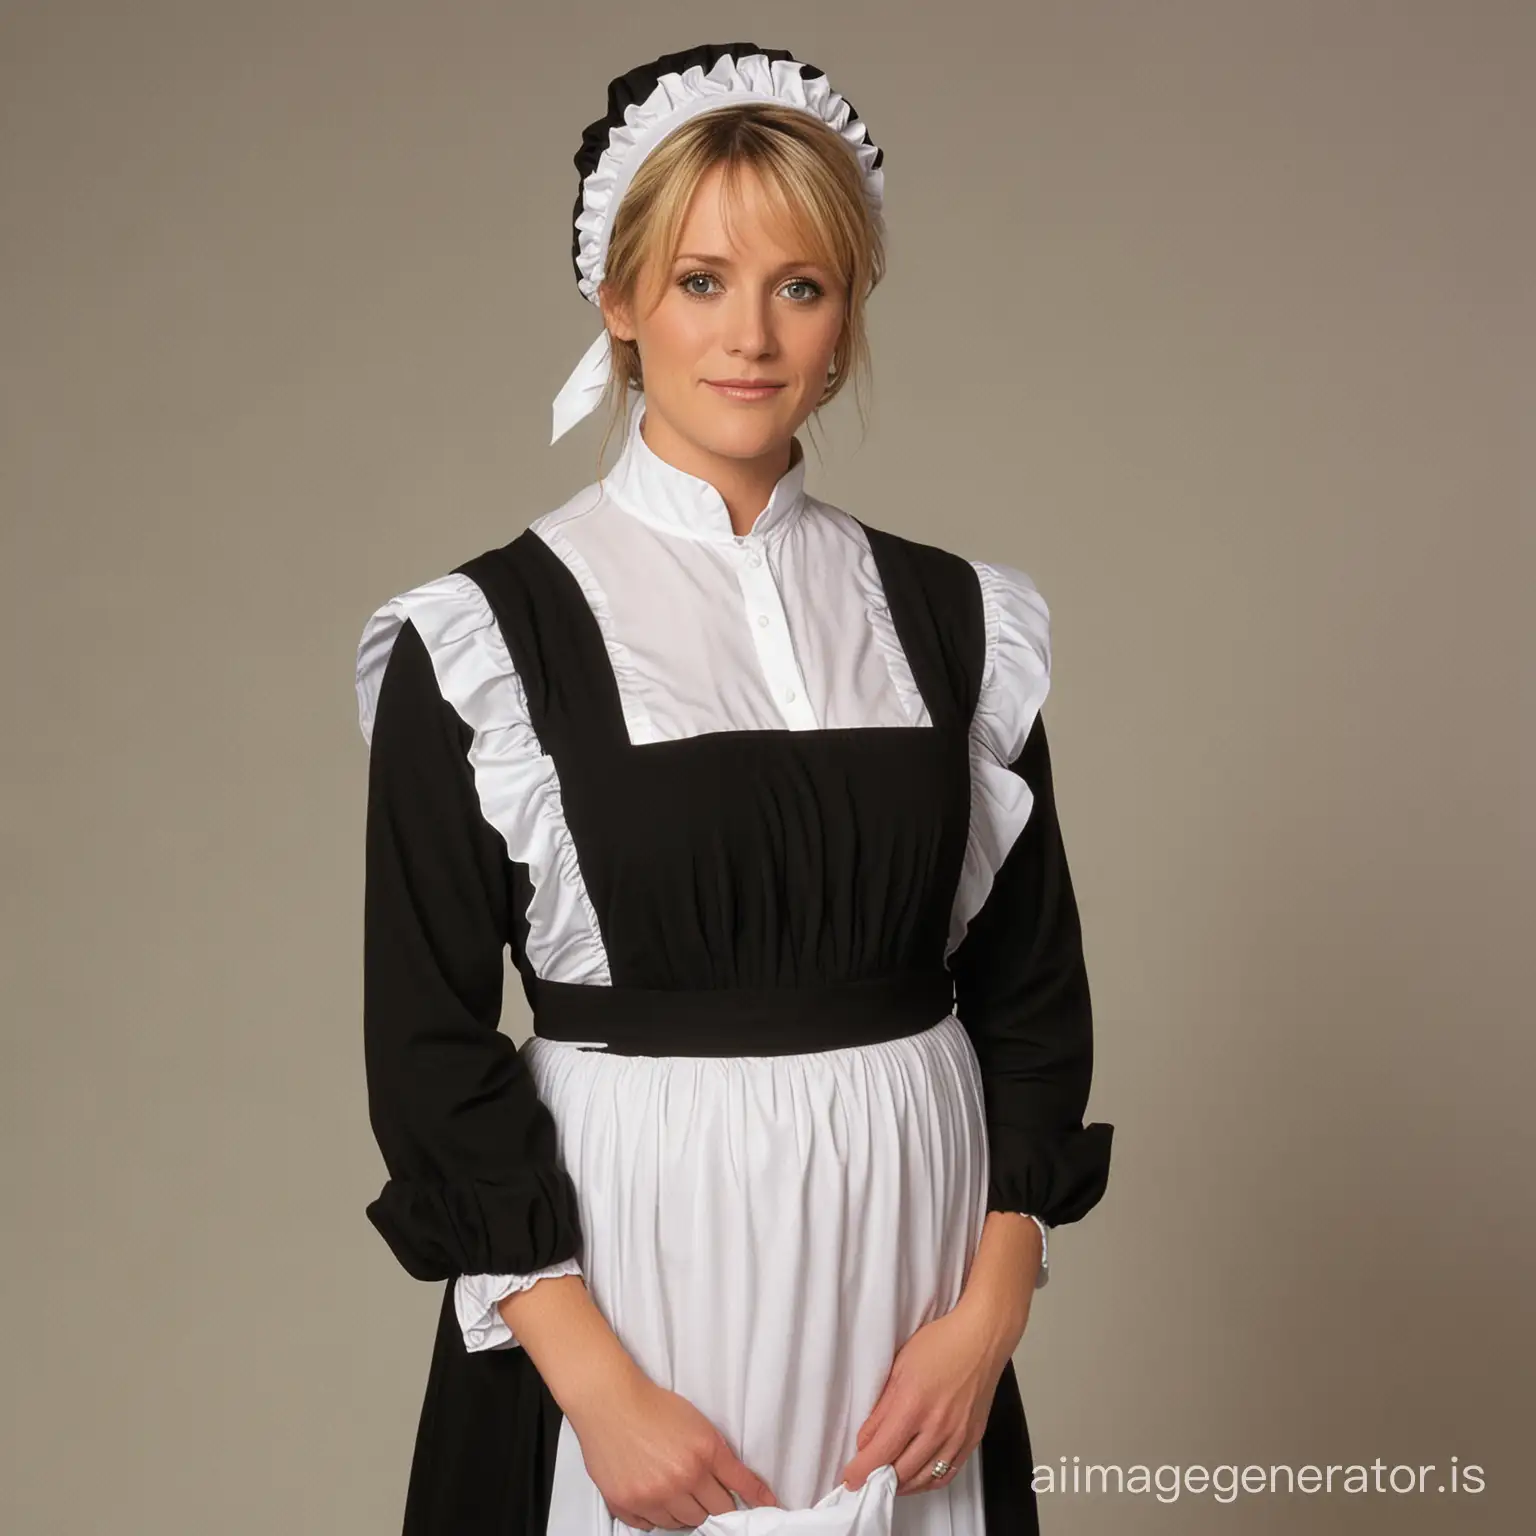 Expectant-Samantha-Carter-in-Traditional-Amish-Attire